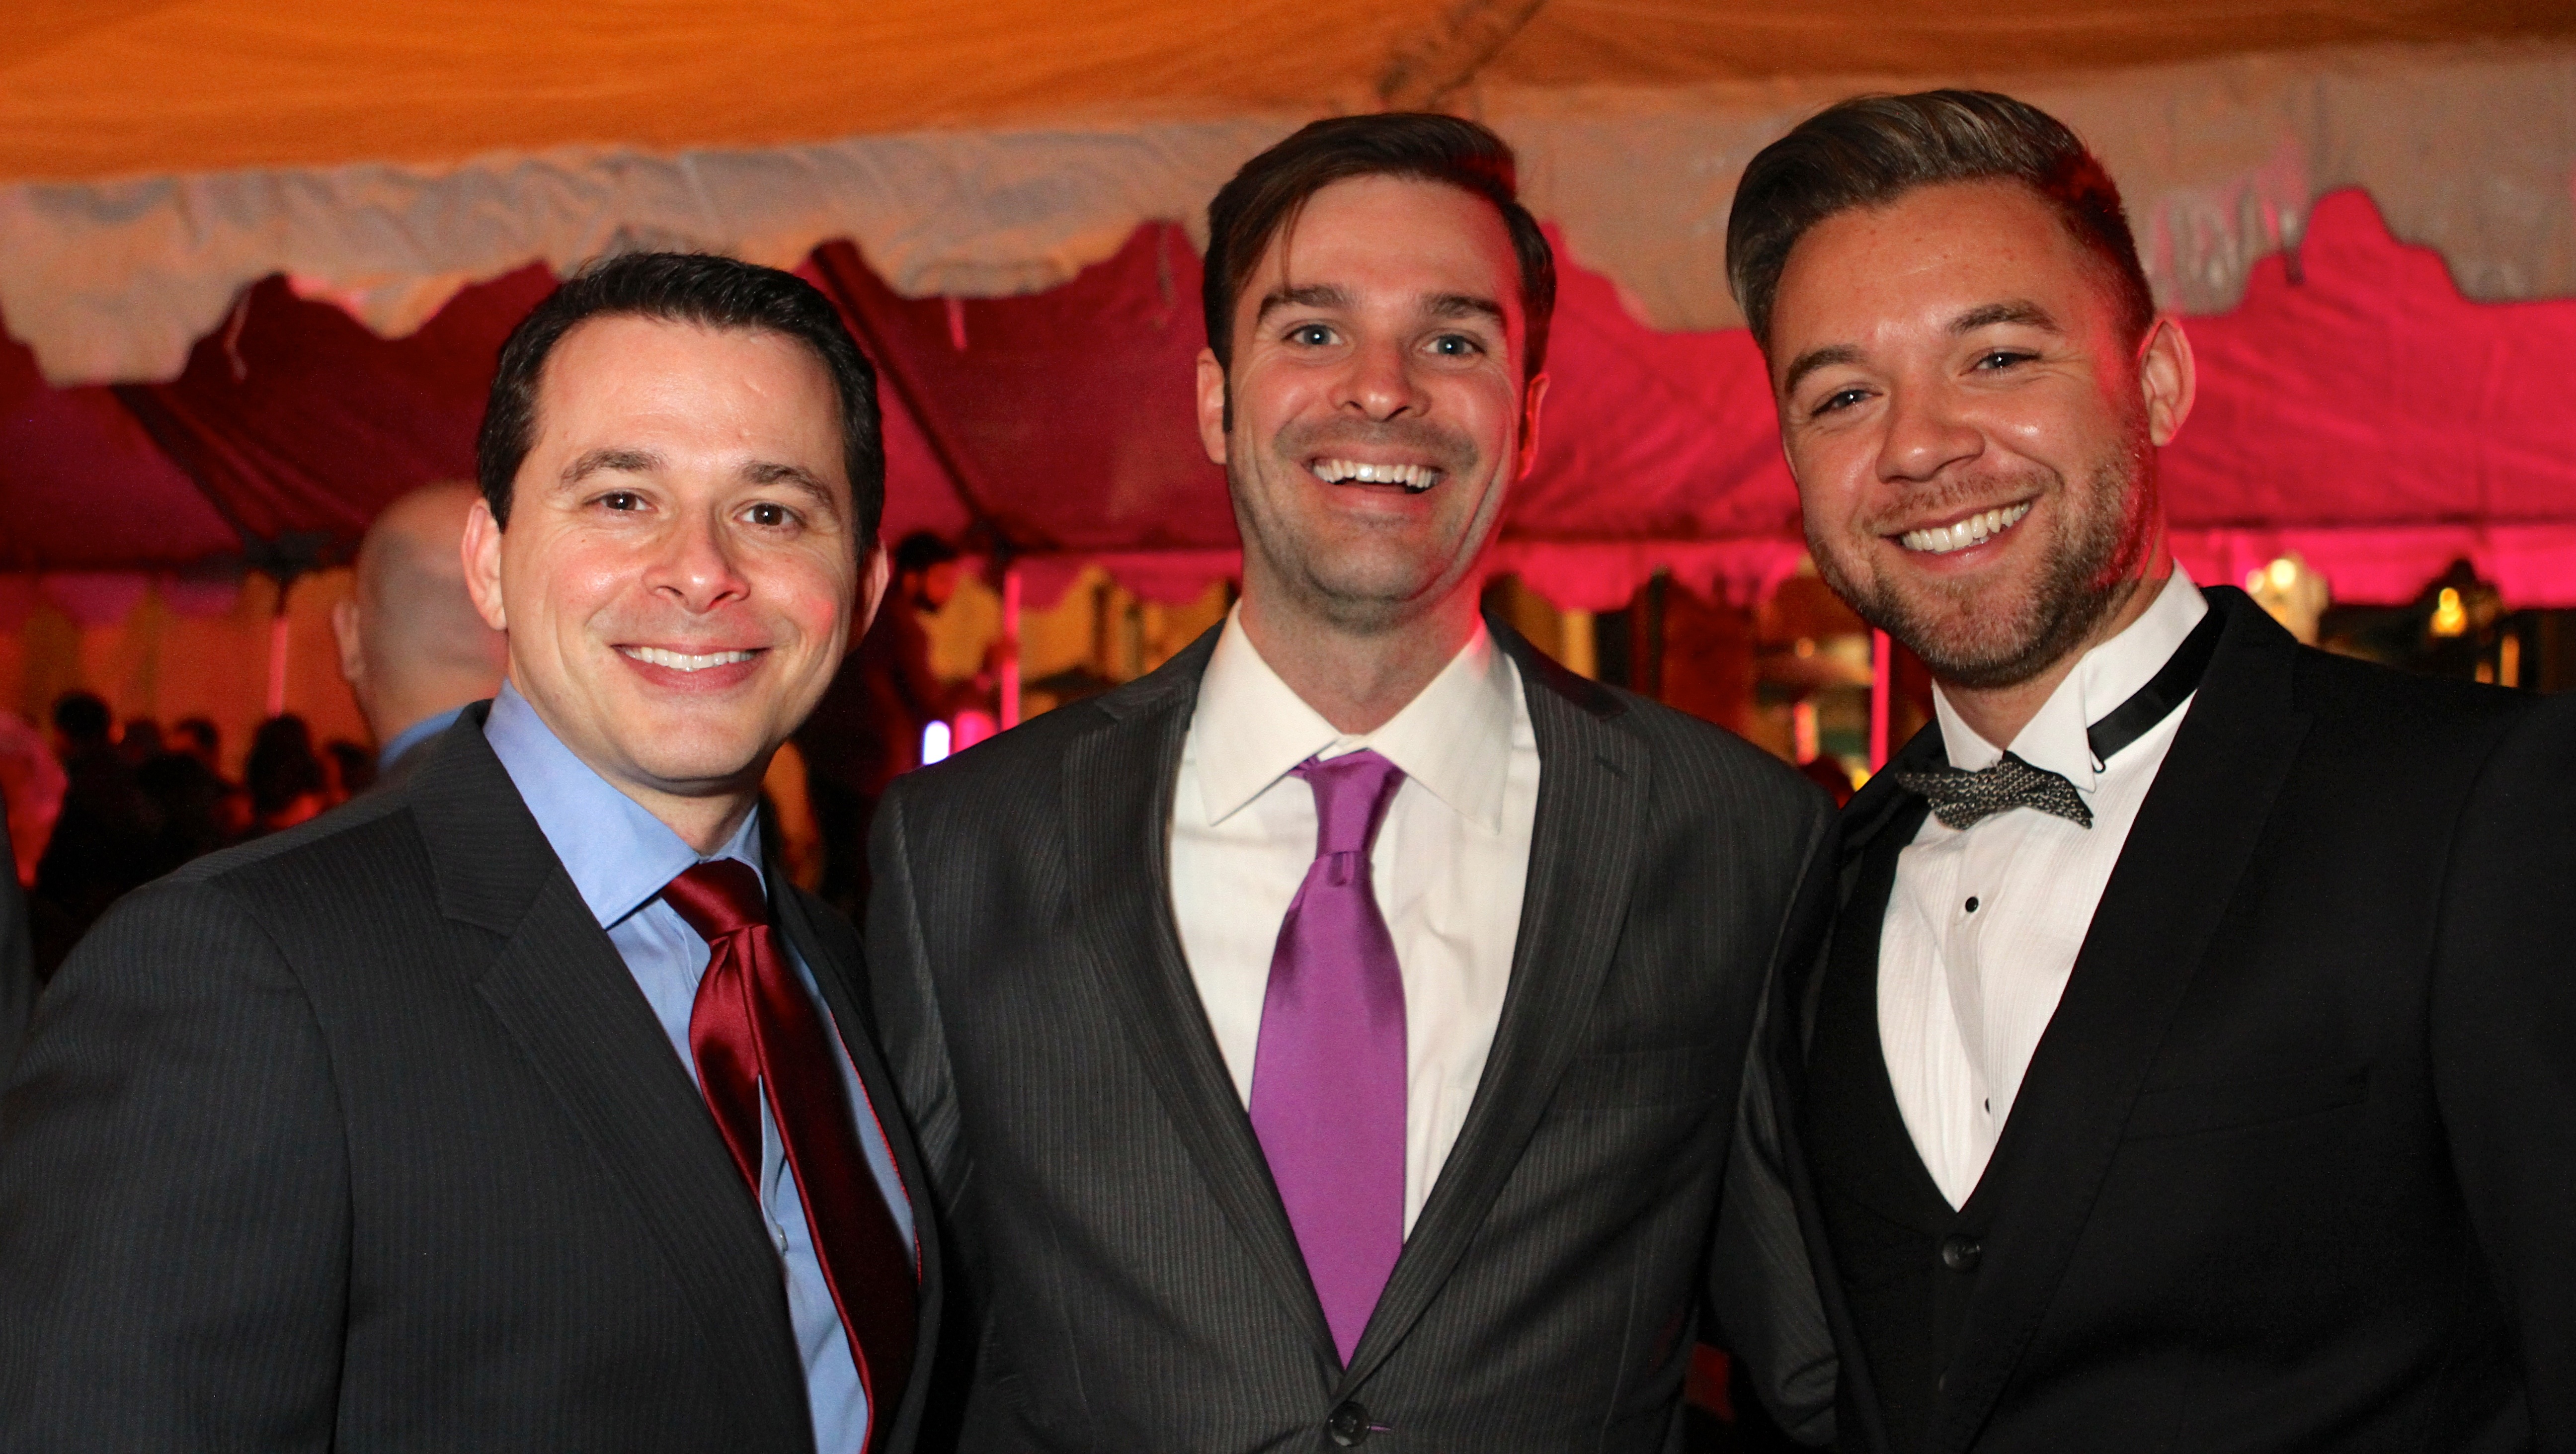 Matt Crabtree, Ben Stanley and Marc Cleary at the 2014 TOSCARS presented by Brits in LA at the Egyptian Theatre in Hollywood.